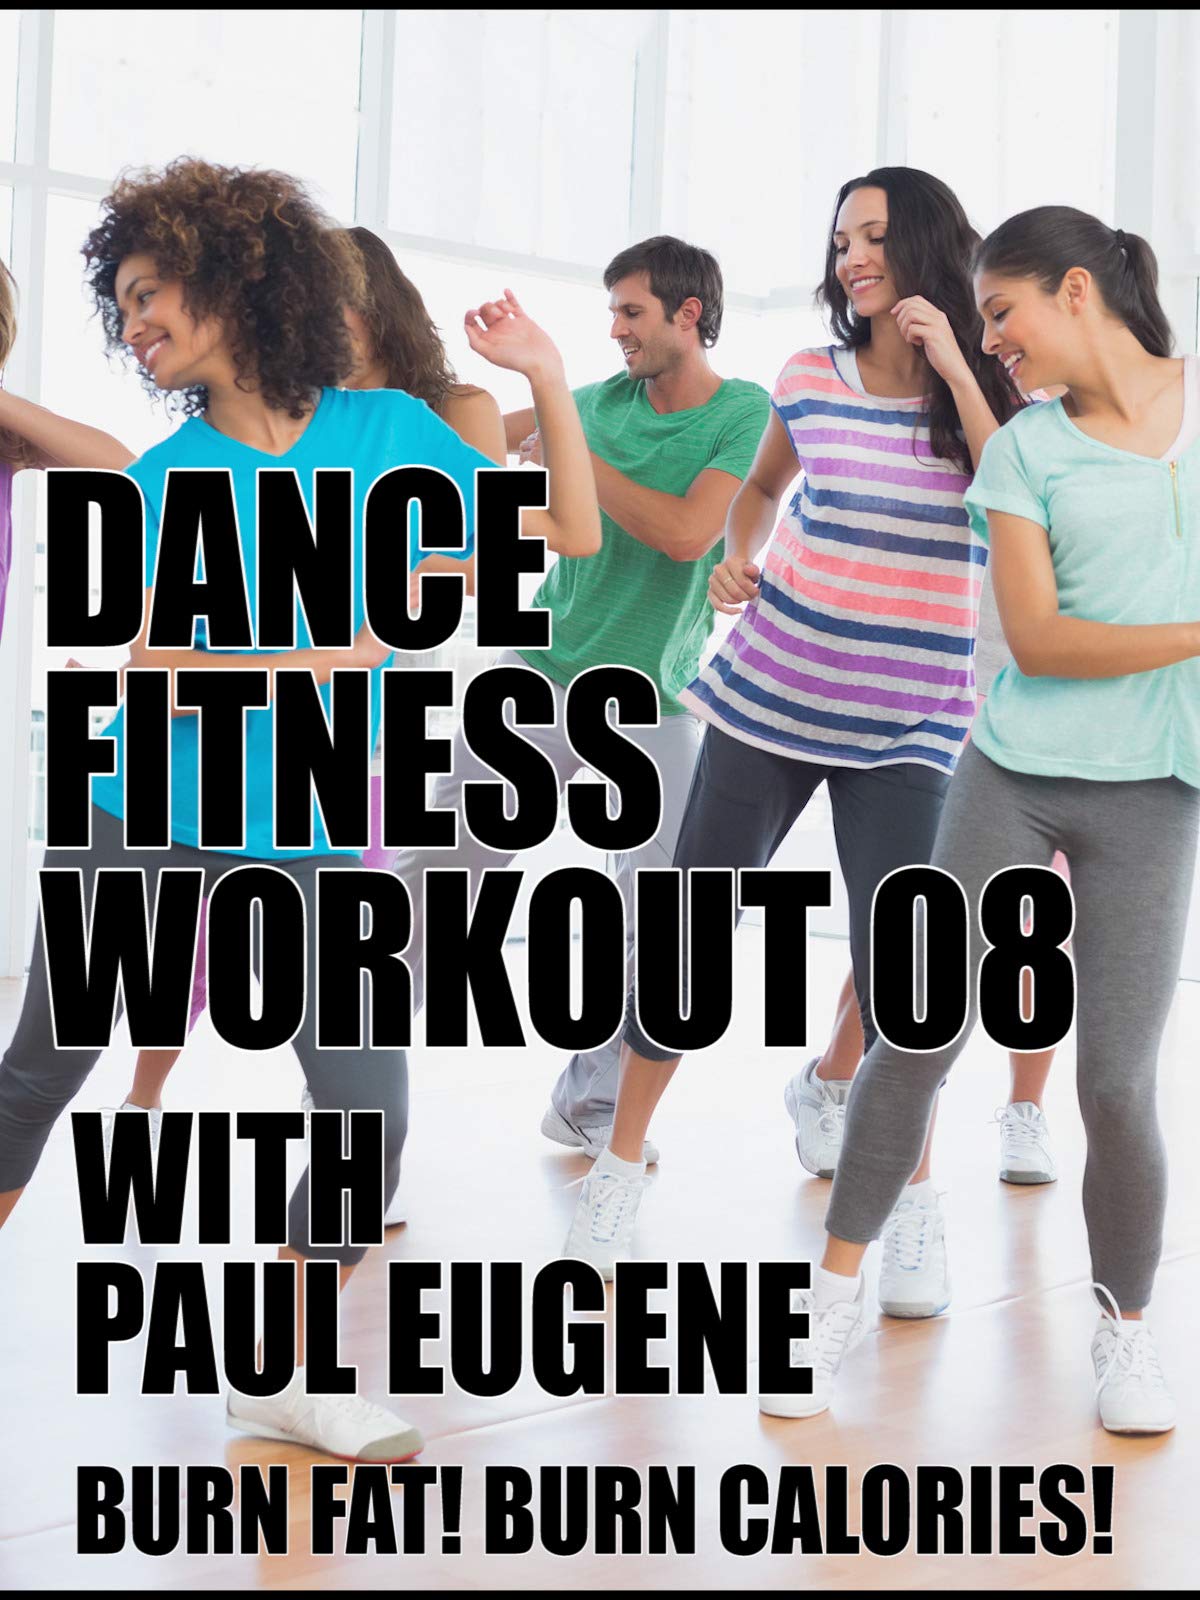 Dance Fitness Workout 08